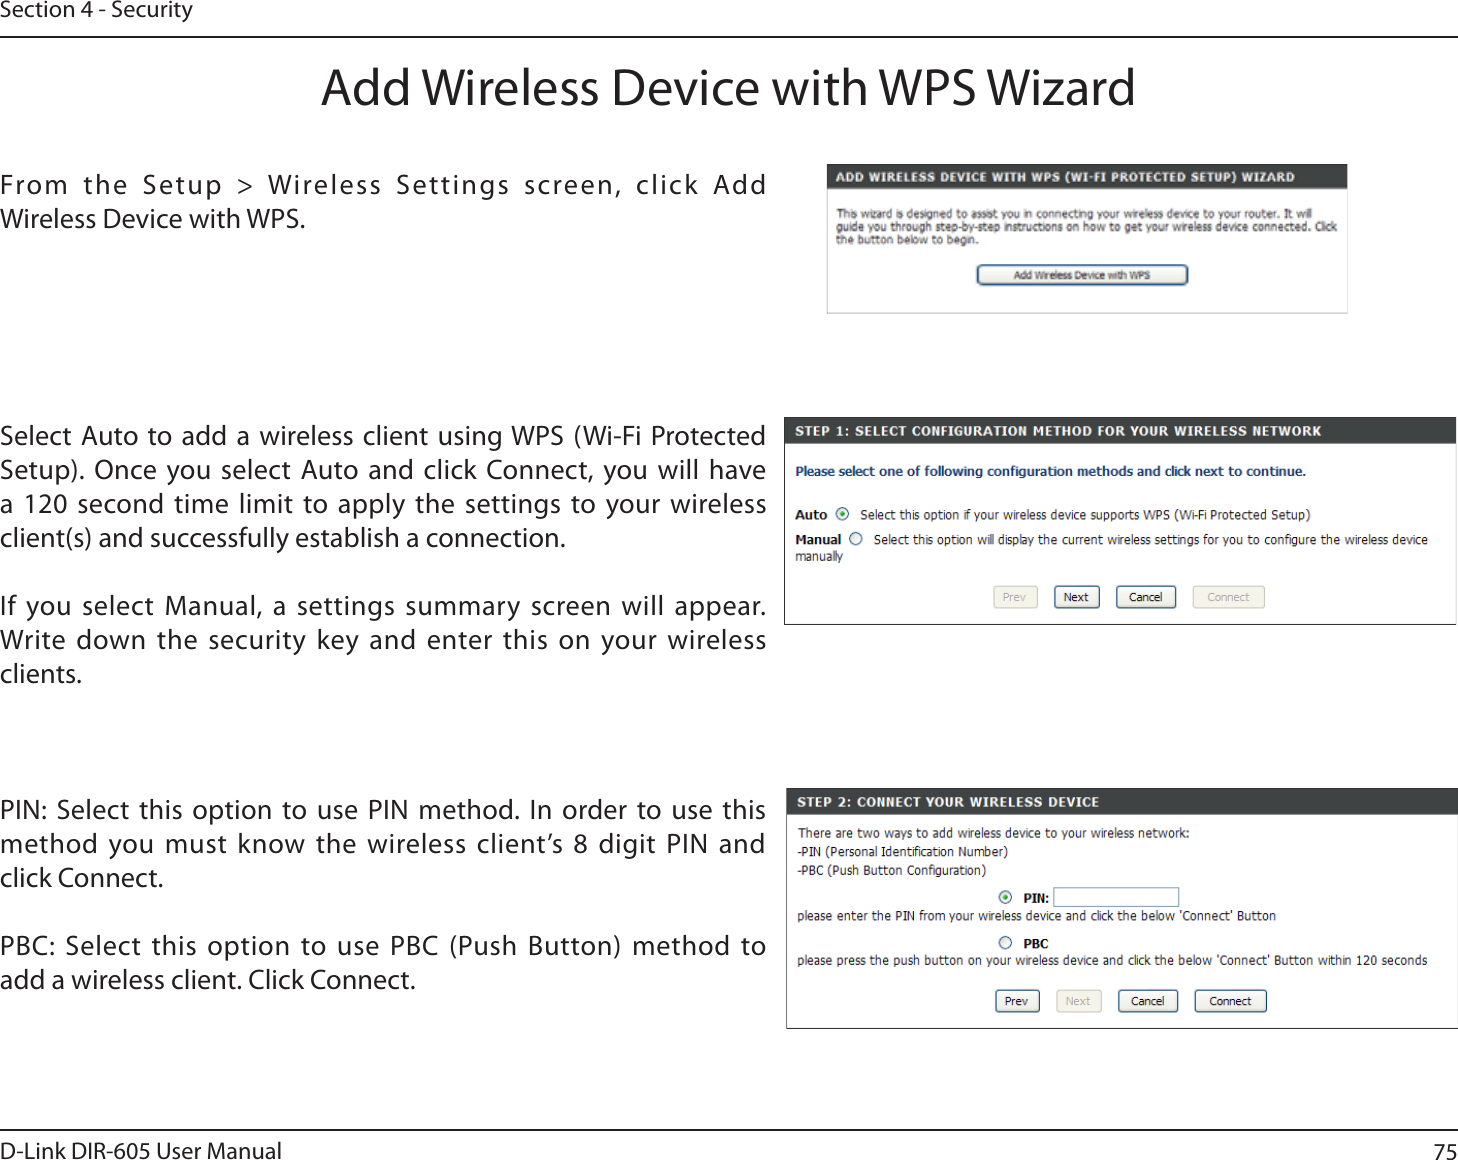 75D-Link DIR-605 User ManualSection 4 - SecurityFrom the Setup &gt; Wireless Settings screen, click Add Wireless Device with WPS.Add Wireless Device with WPS WizardPIN: Select this option to use PIN method. In order to use this method you must know the wireless client’s 8 digit PIN and click Connect.PBC: Select this option to use PBC (Push Button) method to add a wireless client. Click Connect.Select Auto to add a wireless client using WPS (Wi-Fi Protected Setup). Once you select Auto and click Connect, you will have a 120 second time limit to apply the settings to your wireless client(s) and successfully establish a connection. If you select Manual, a settings summary screen will appear. Write down the security key and enter this on your wireless clients. 